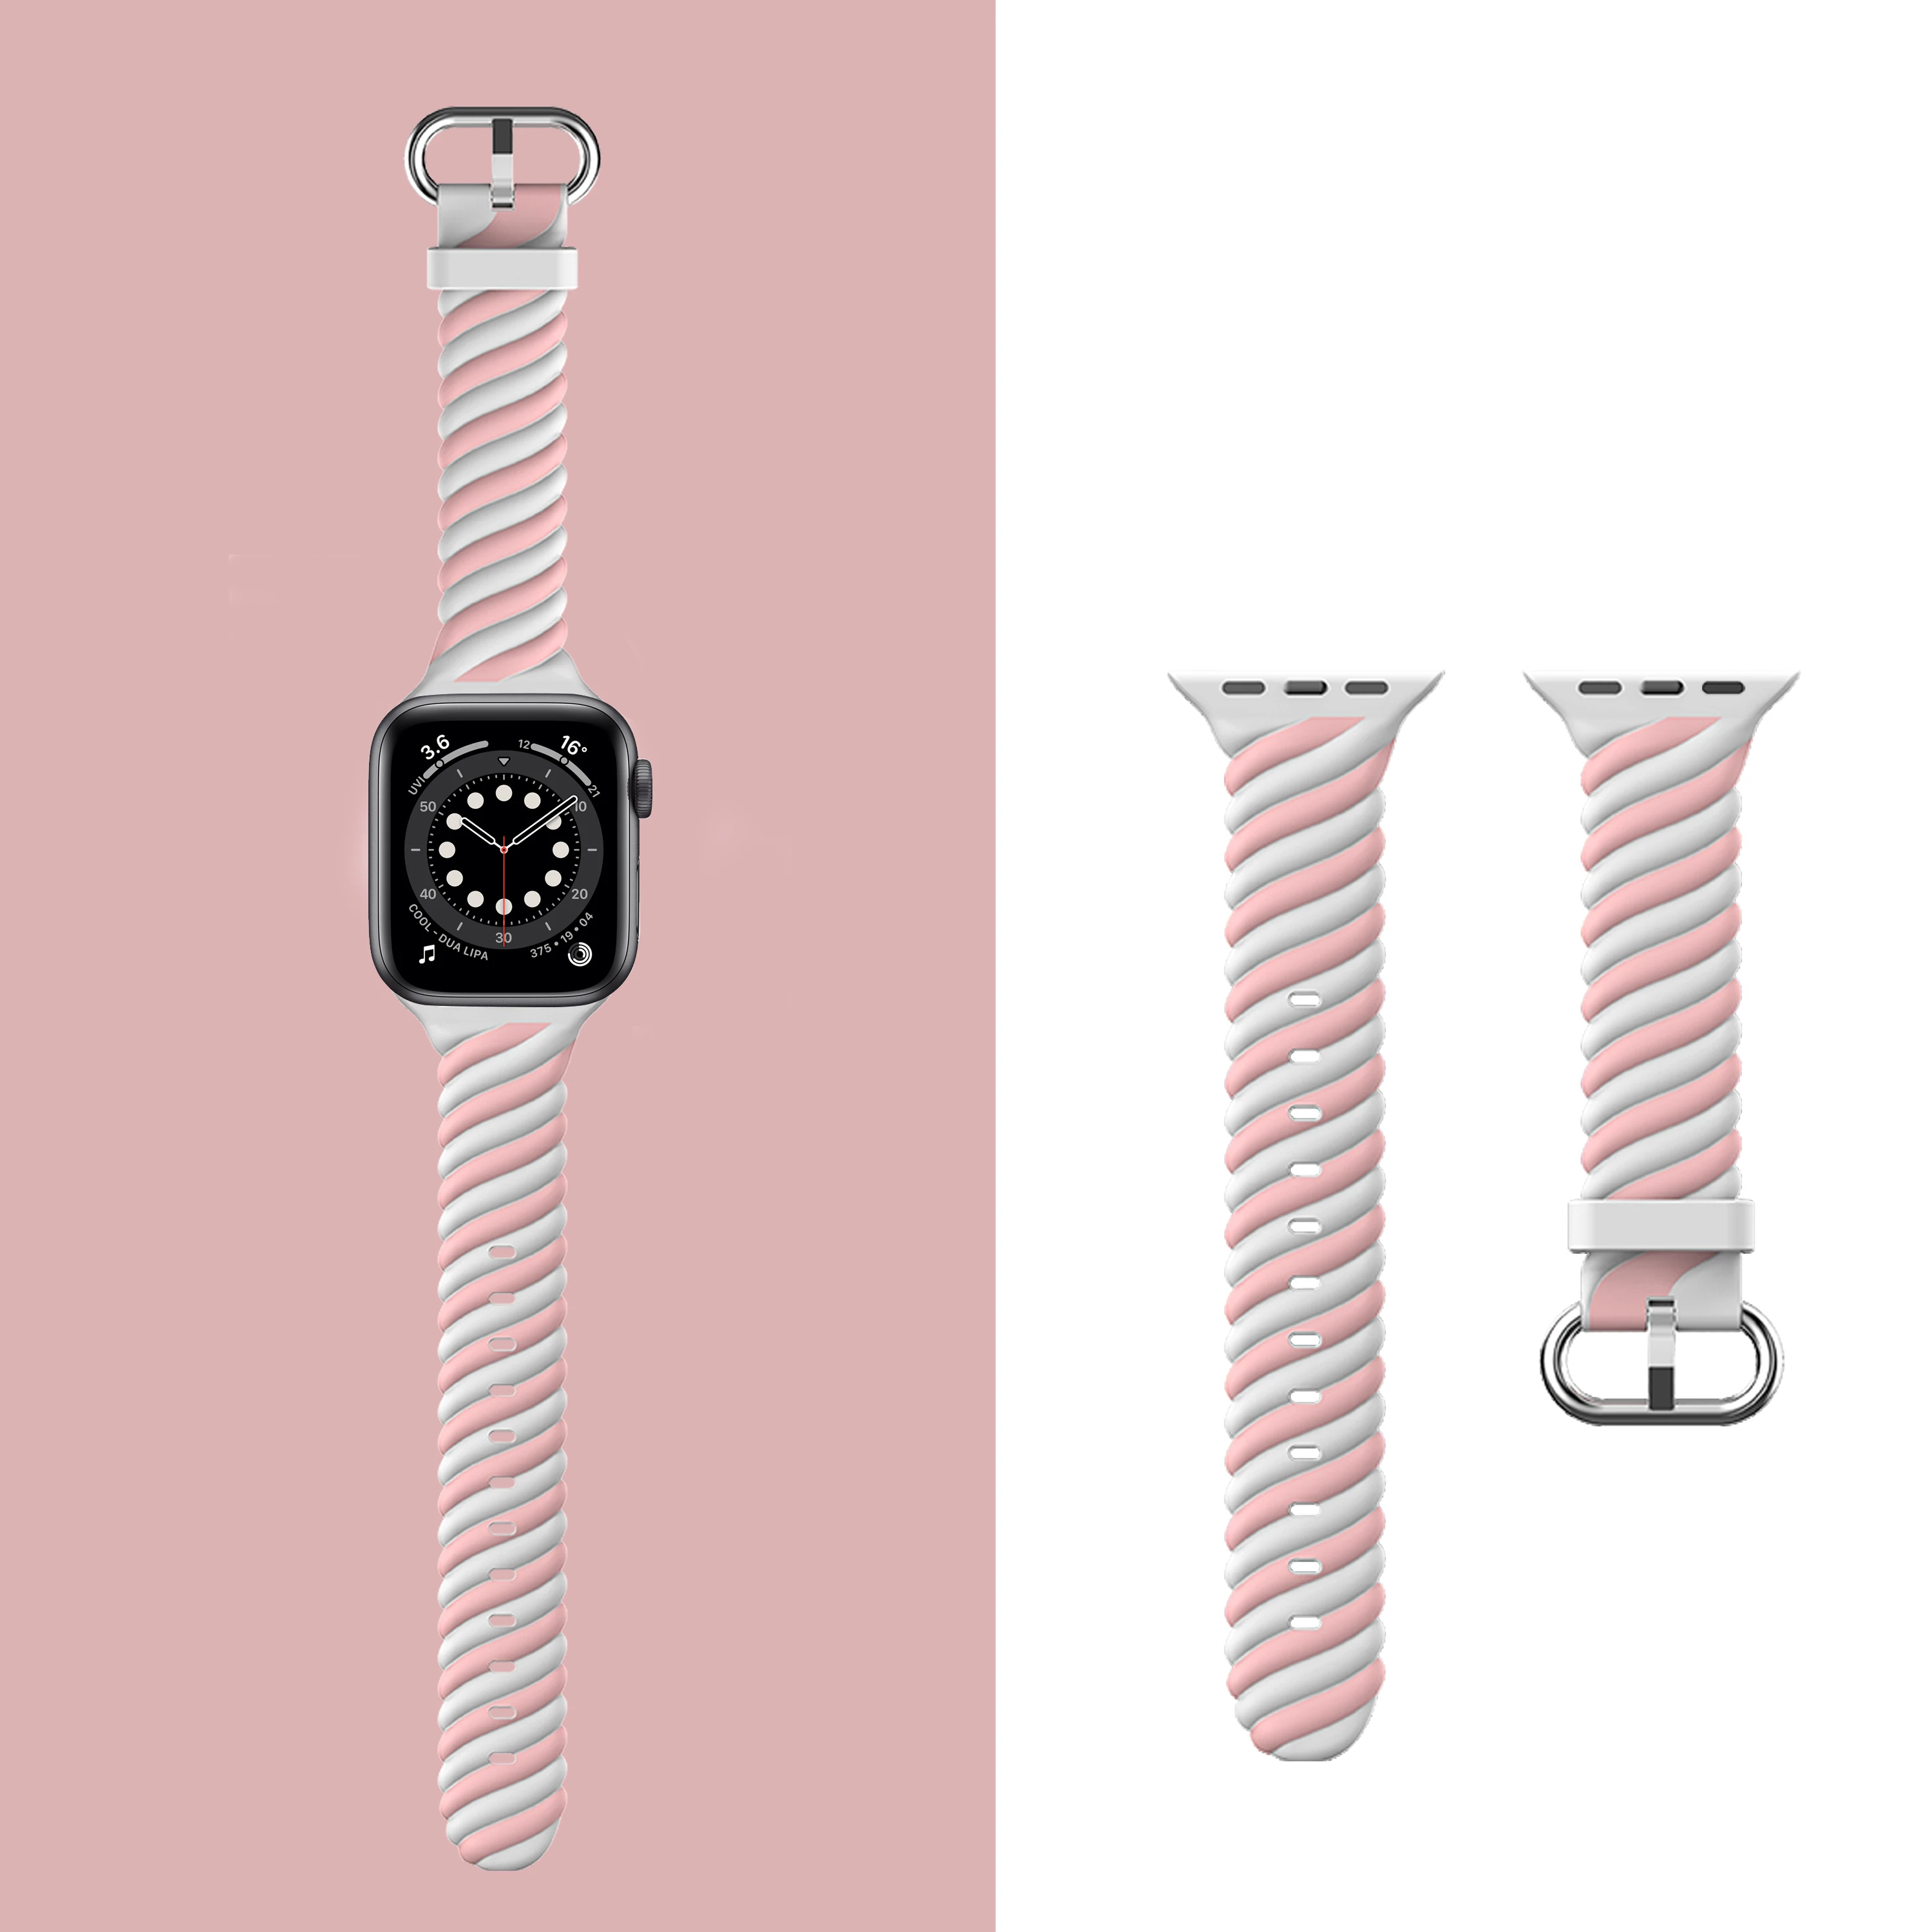 

GOOSUU 40mm Silicone twist strap for Apple Watch Band 44mm 38mm 42mm Watchband Woman Bracelet For Iwatch Series SE Accessories